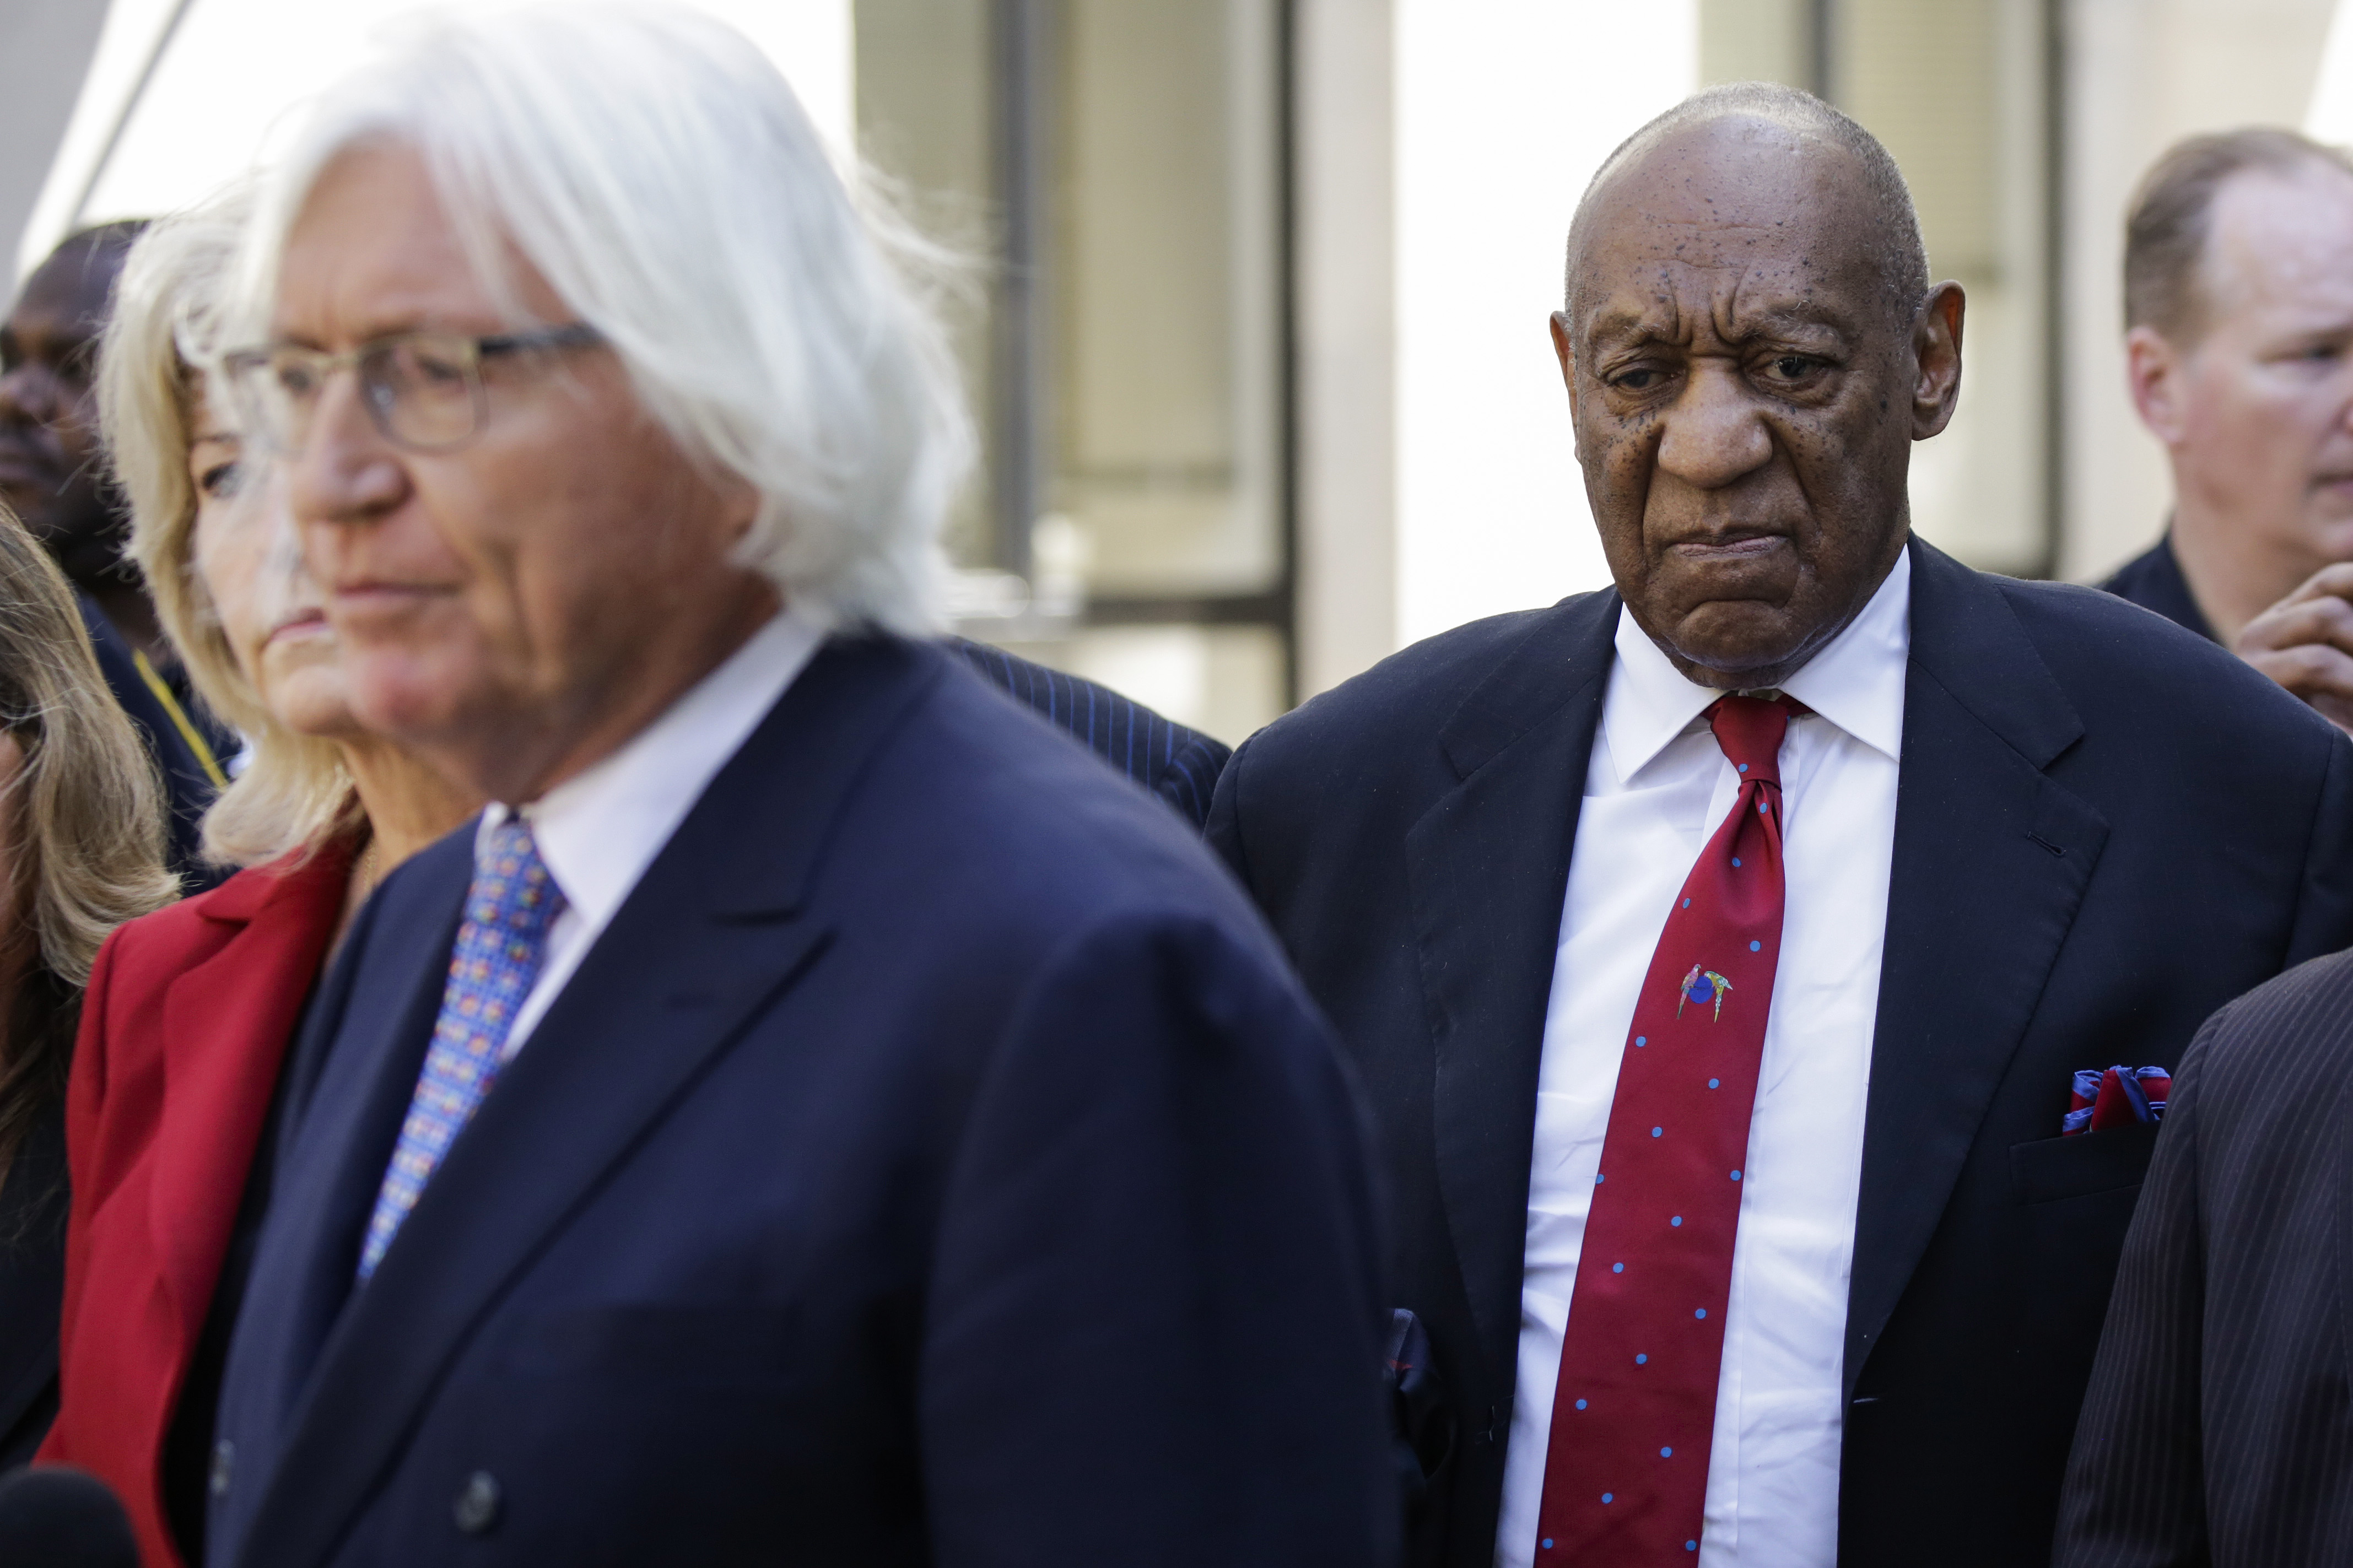 US-COSBY-ENTERTAINMENT-TELEVISION-CRIME-COURT